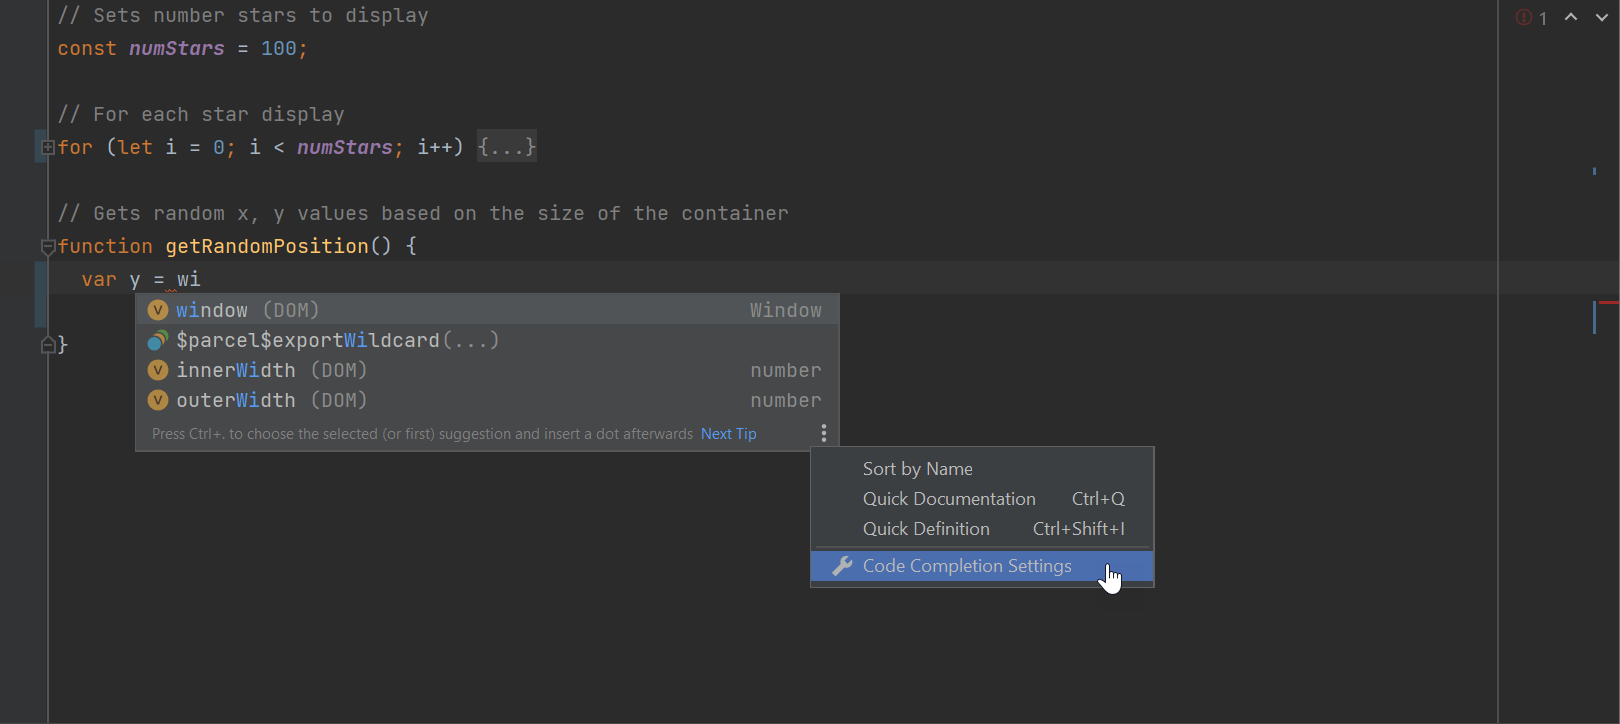 Faster access to code completion settings